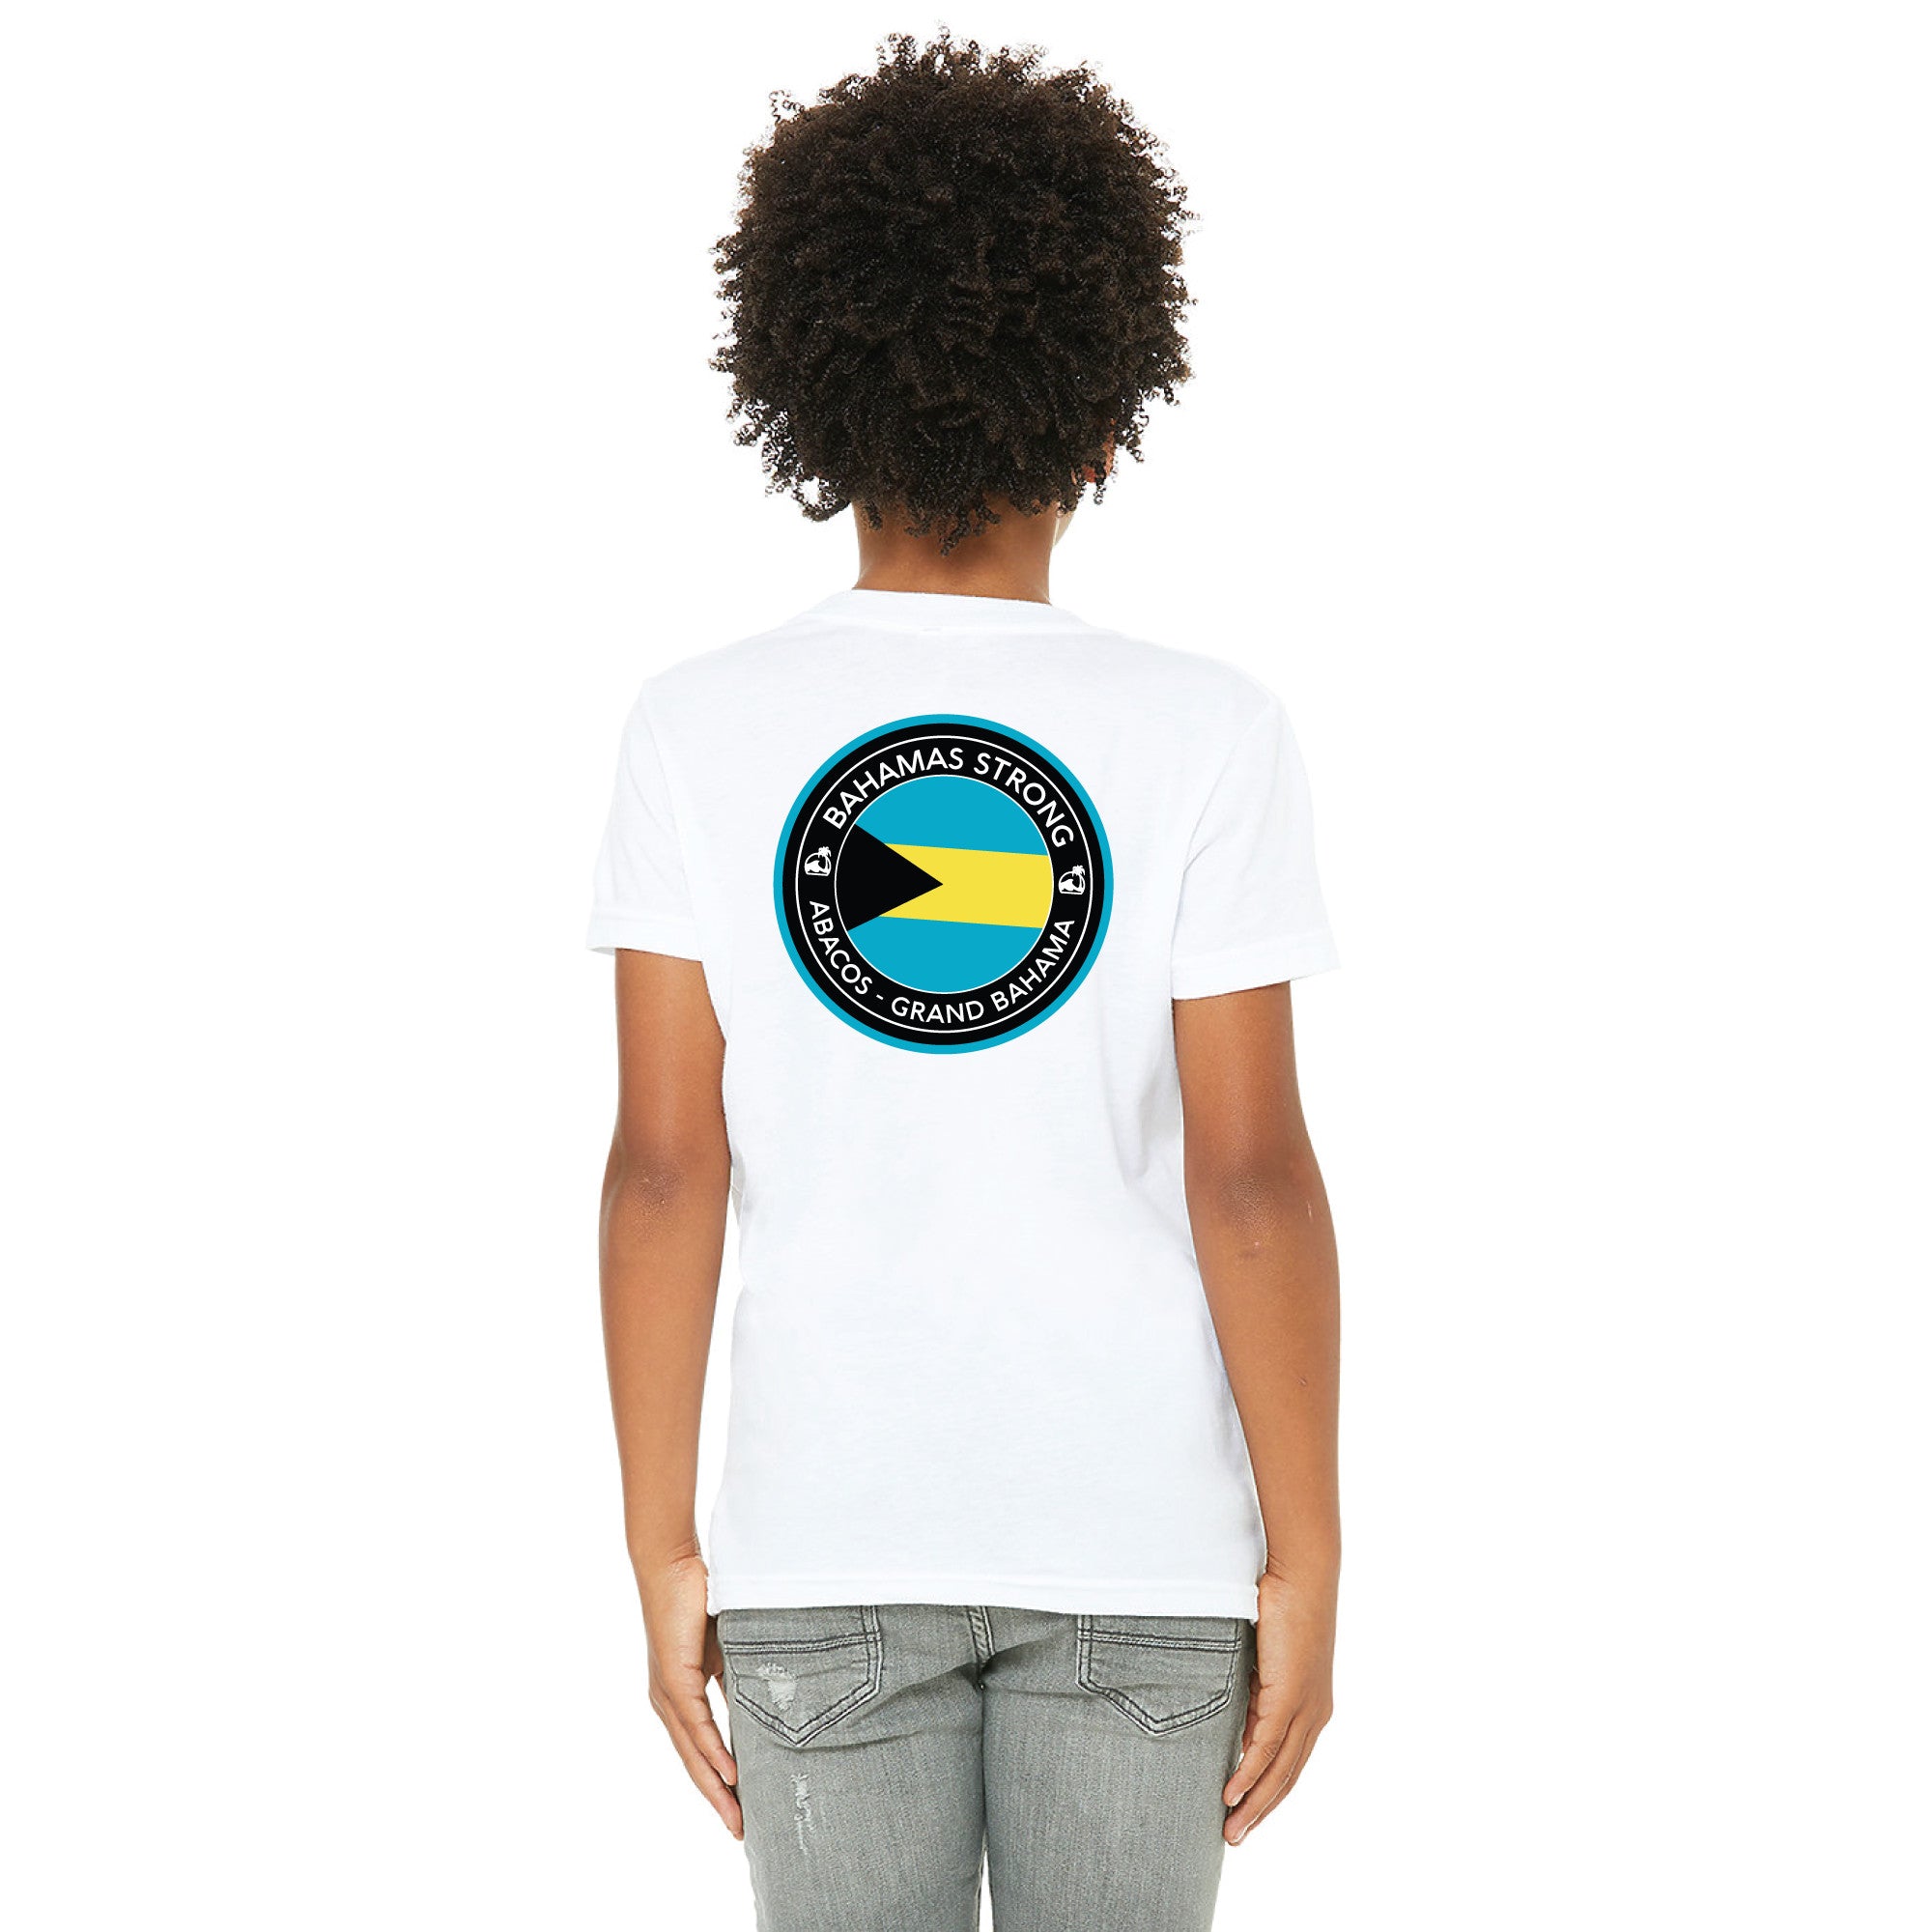 Island Water Sports Bahamas Strong Tee White S/S Youth S (6-8)